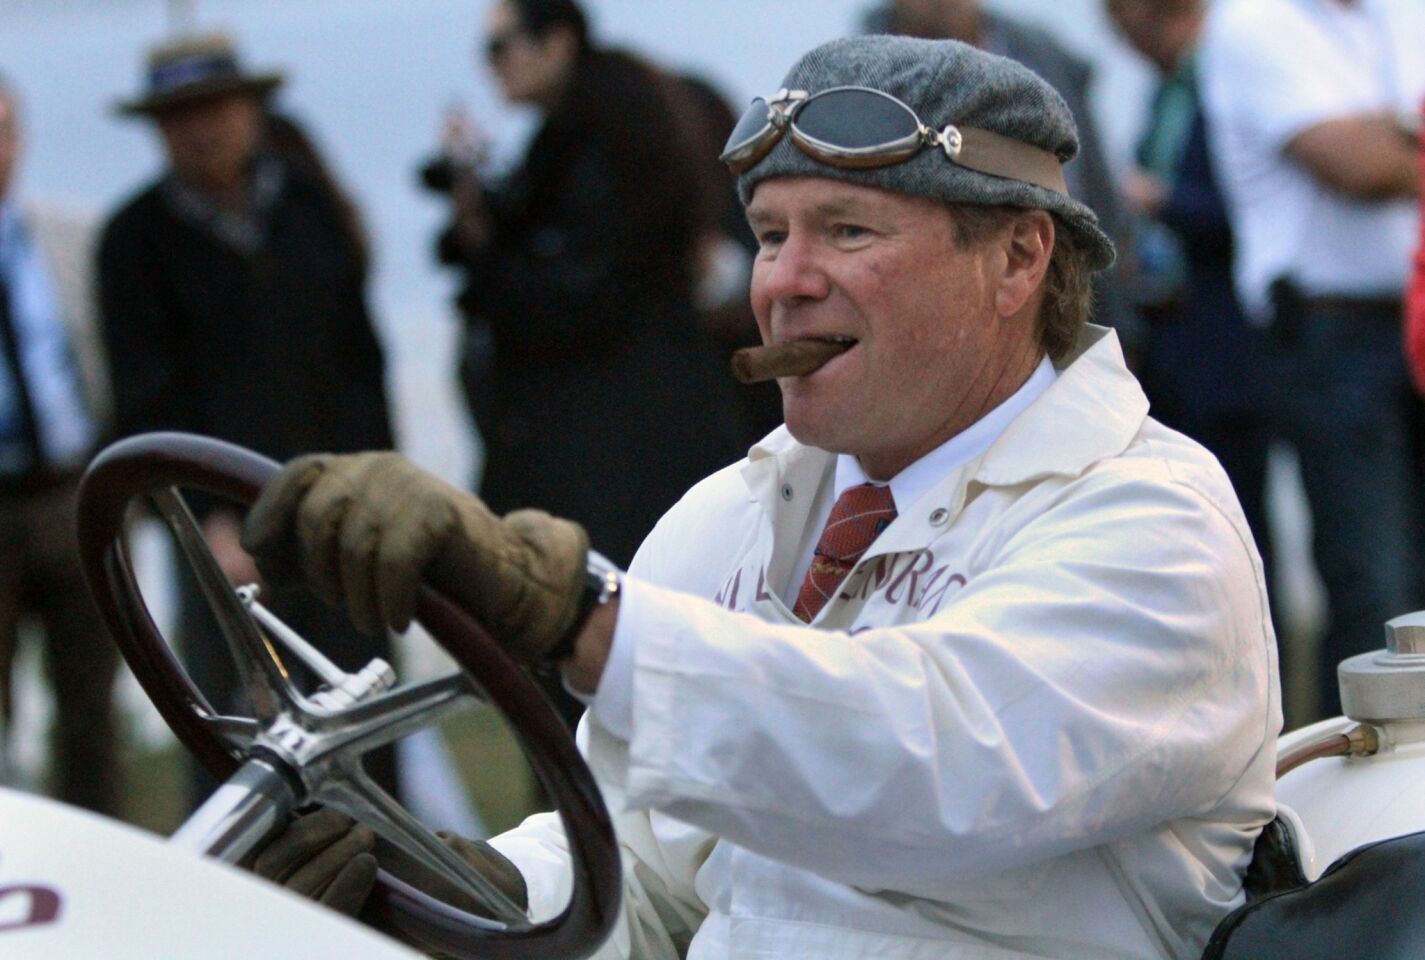 Chewing on his cigar, Rick Rawlins drives a 1908 Prince Henry Benz, owned by Ann Bothwell but originally owned by race car driver Barney Oldfield, as nearly 200 collector cars greet the dawn as they roll onto the 18th fairway at Pebble Beach to begin the Pebble Beach Concours d'Elegance.